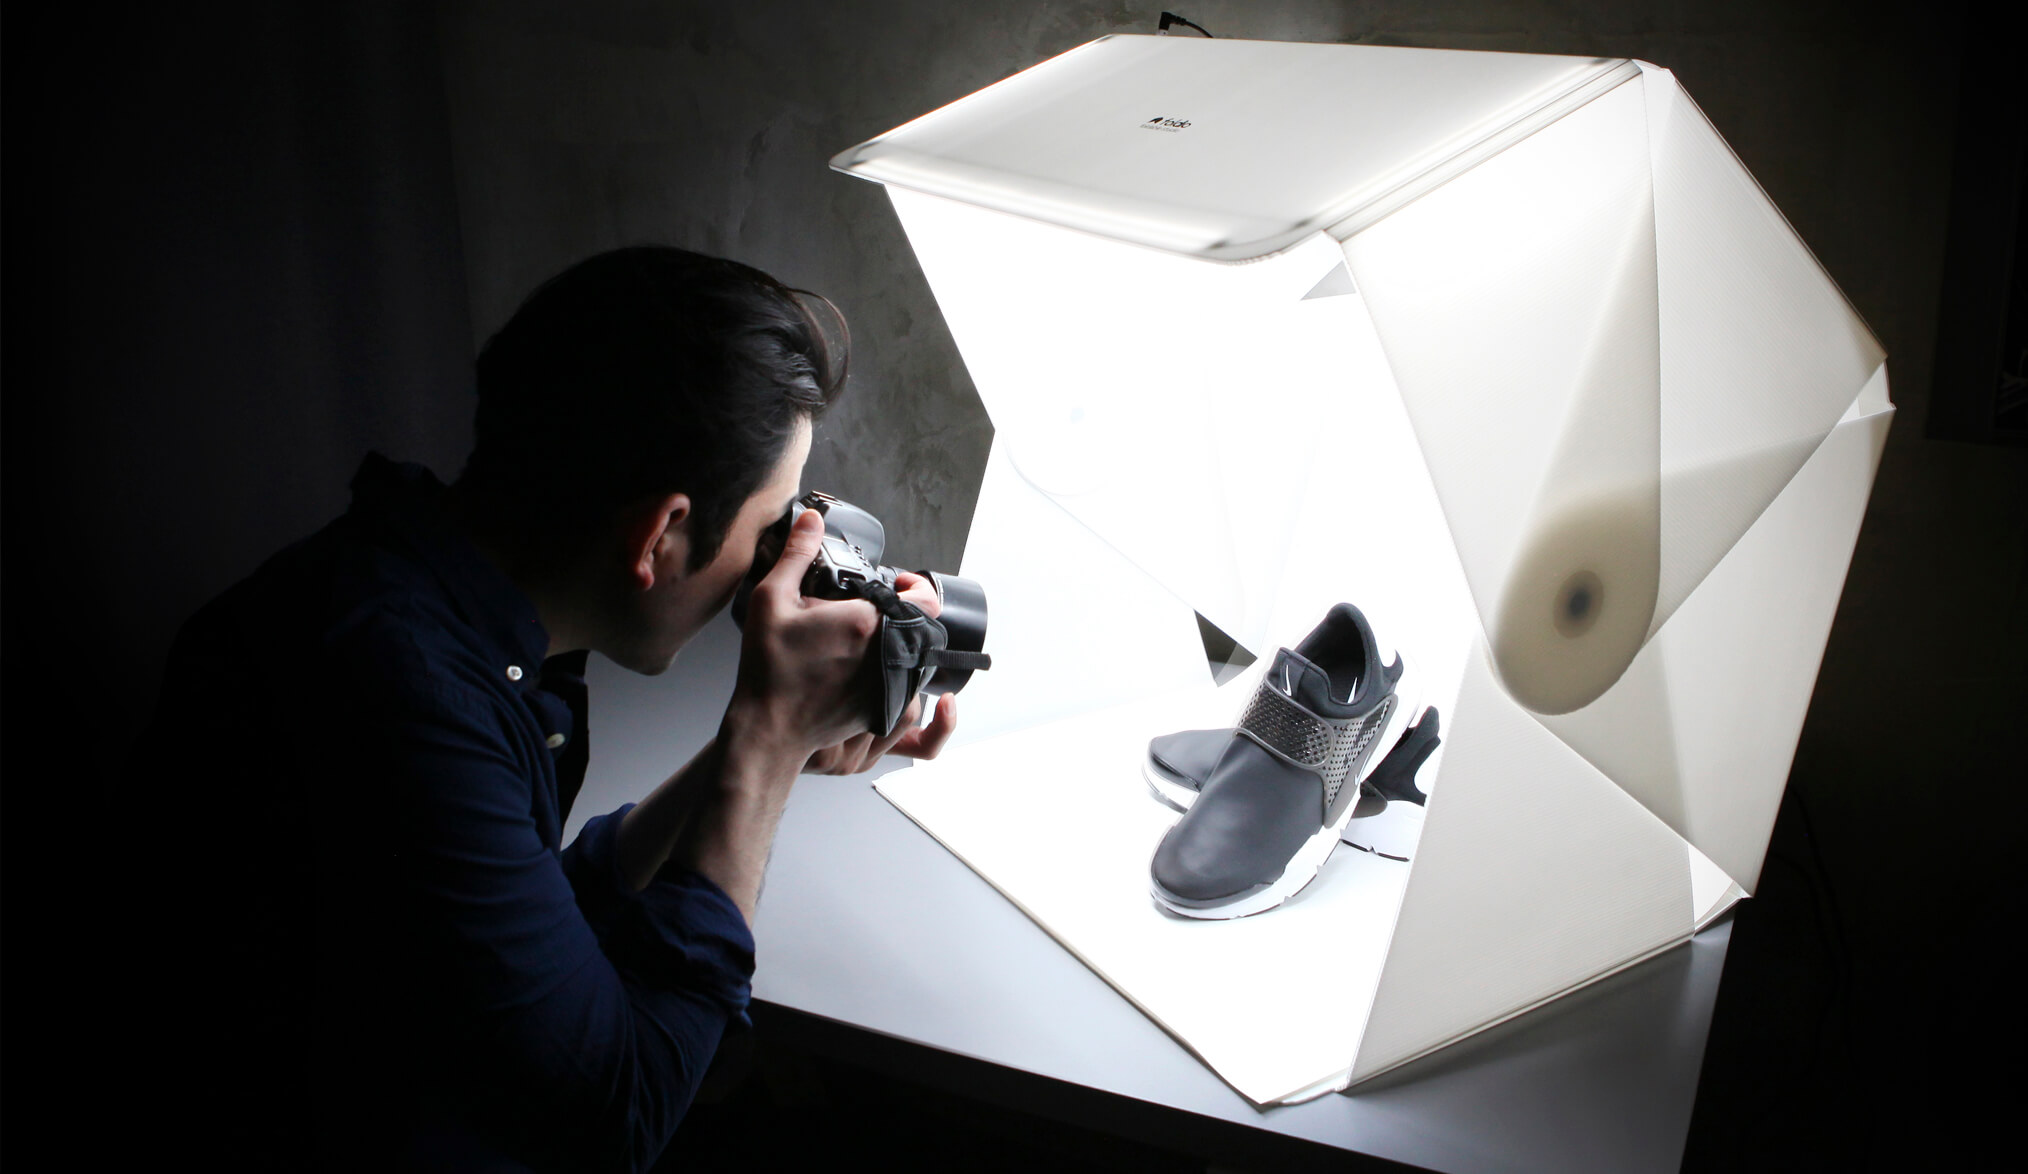 Stellar Product Photography Ideas That Will Help You Sell More